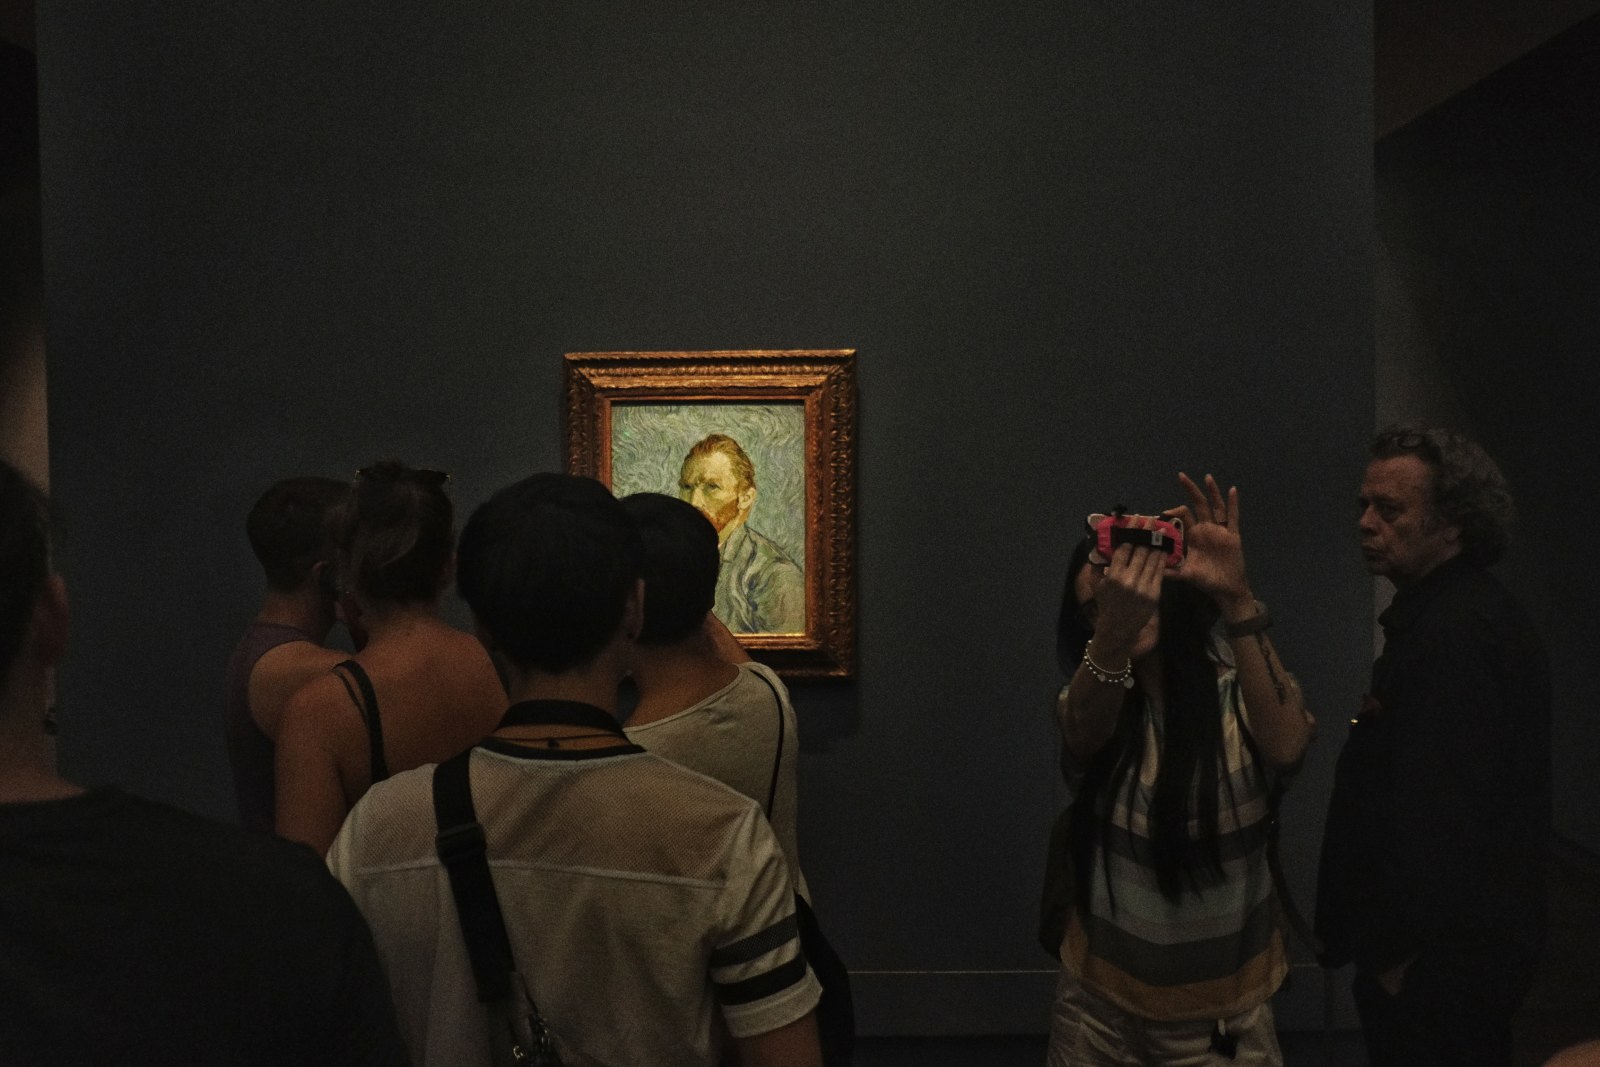 A selfie with Vincent van Gogh, Musée d'Orsay. Street style travel photography by Kent Johnson.